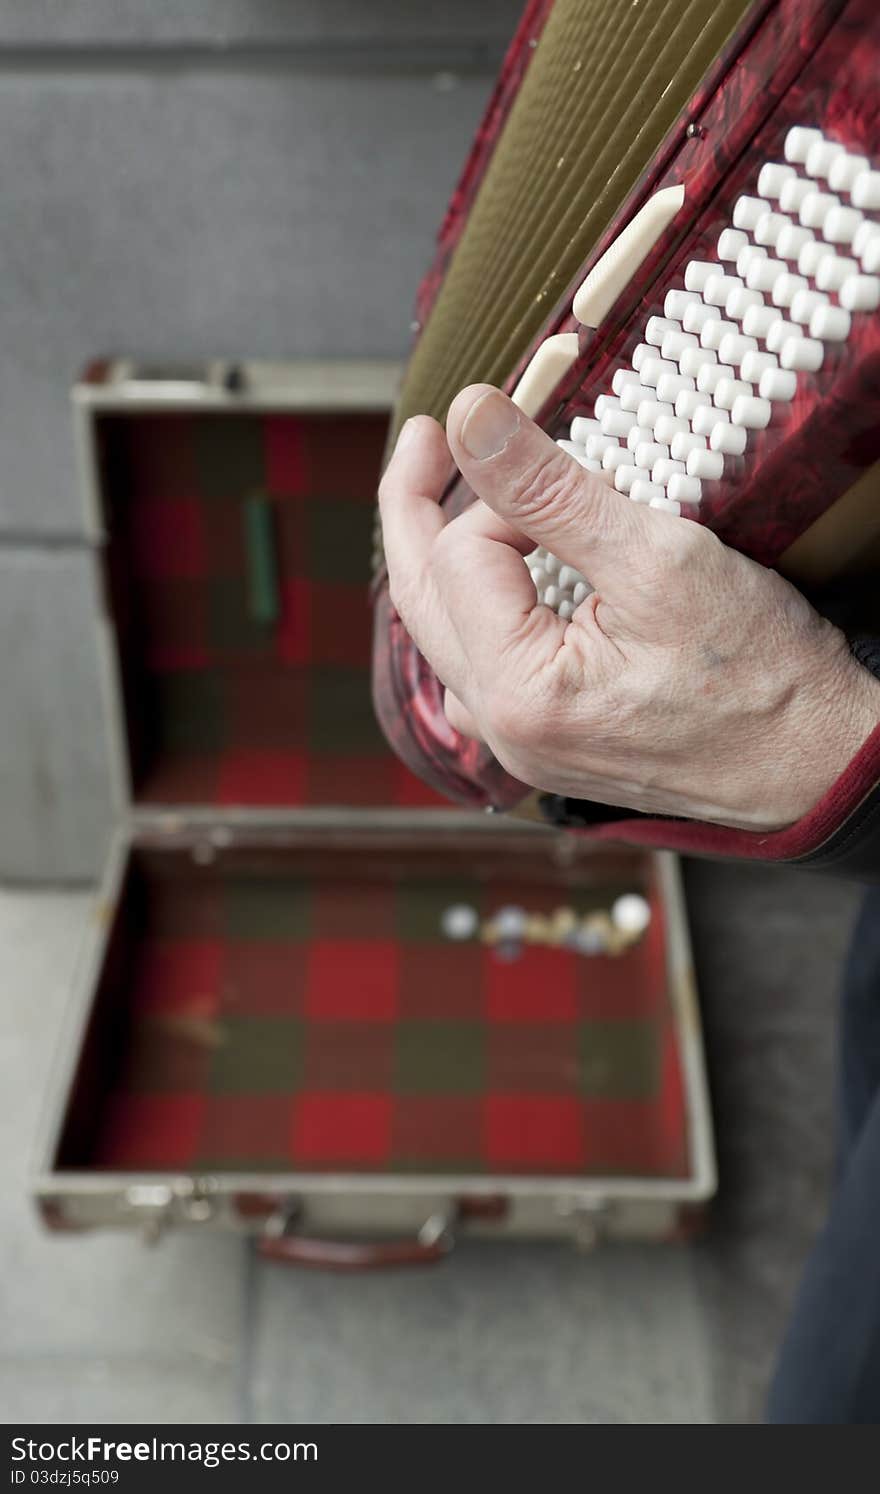 Street performer playing music on a vintage accordion squeeze box. Street performer playing music on a vintage accordion squeeze box